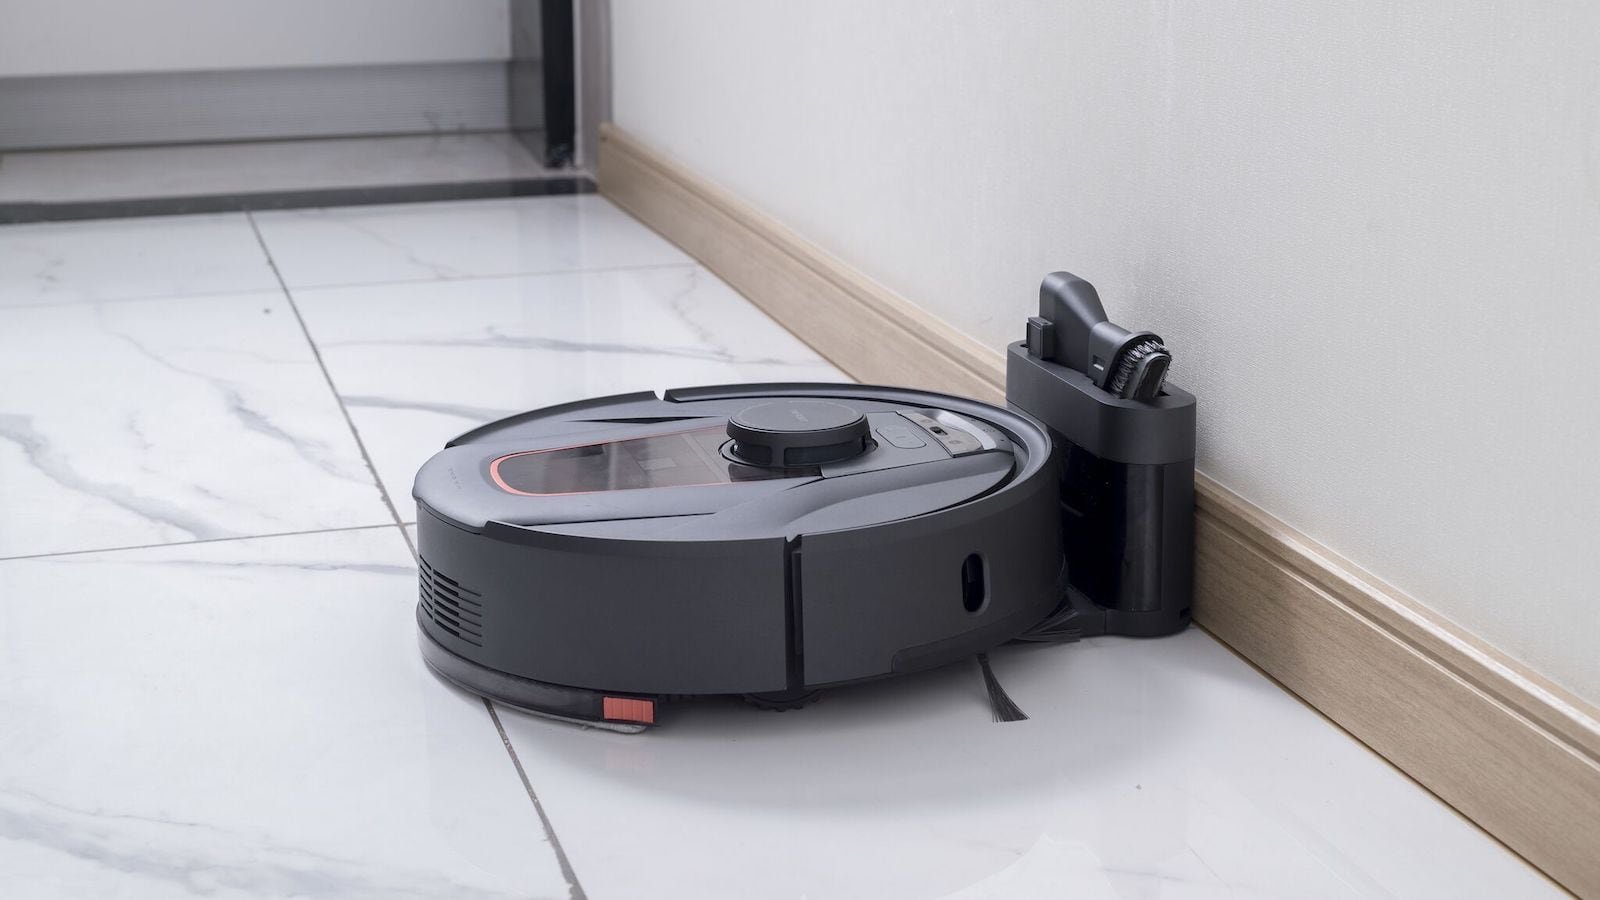 HaierTAB Robot Mop and Vacuum gives you hassle-free, tangle-free cleaning